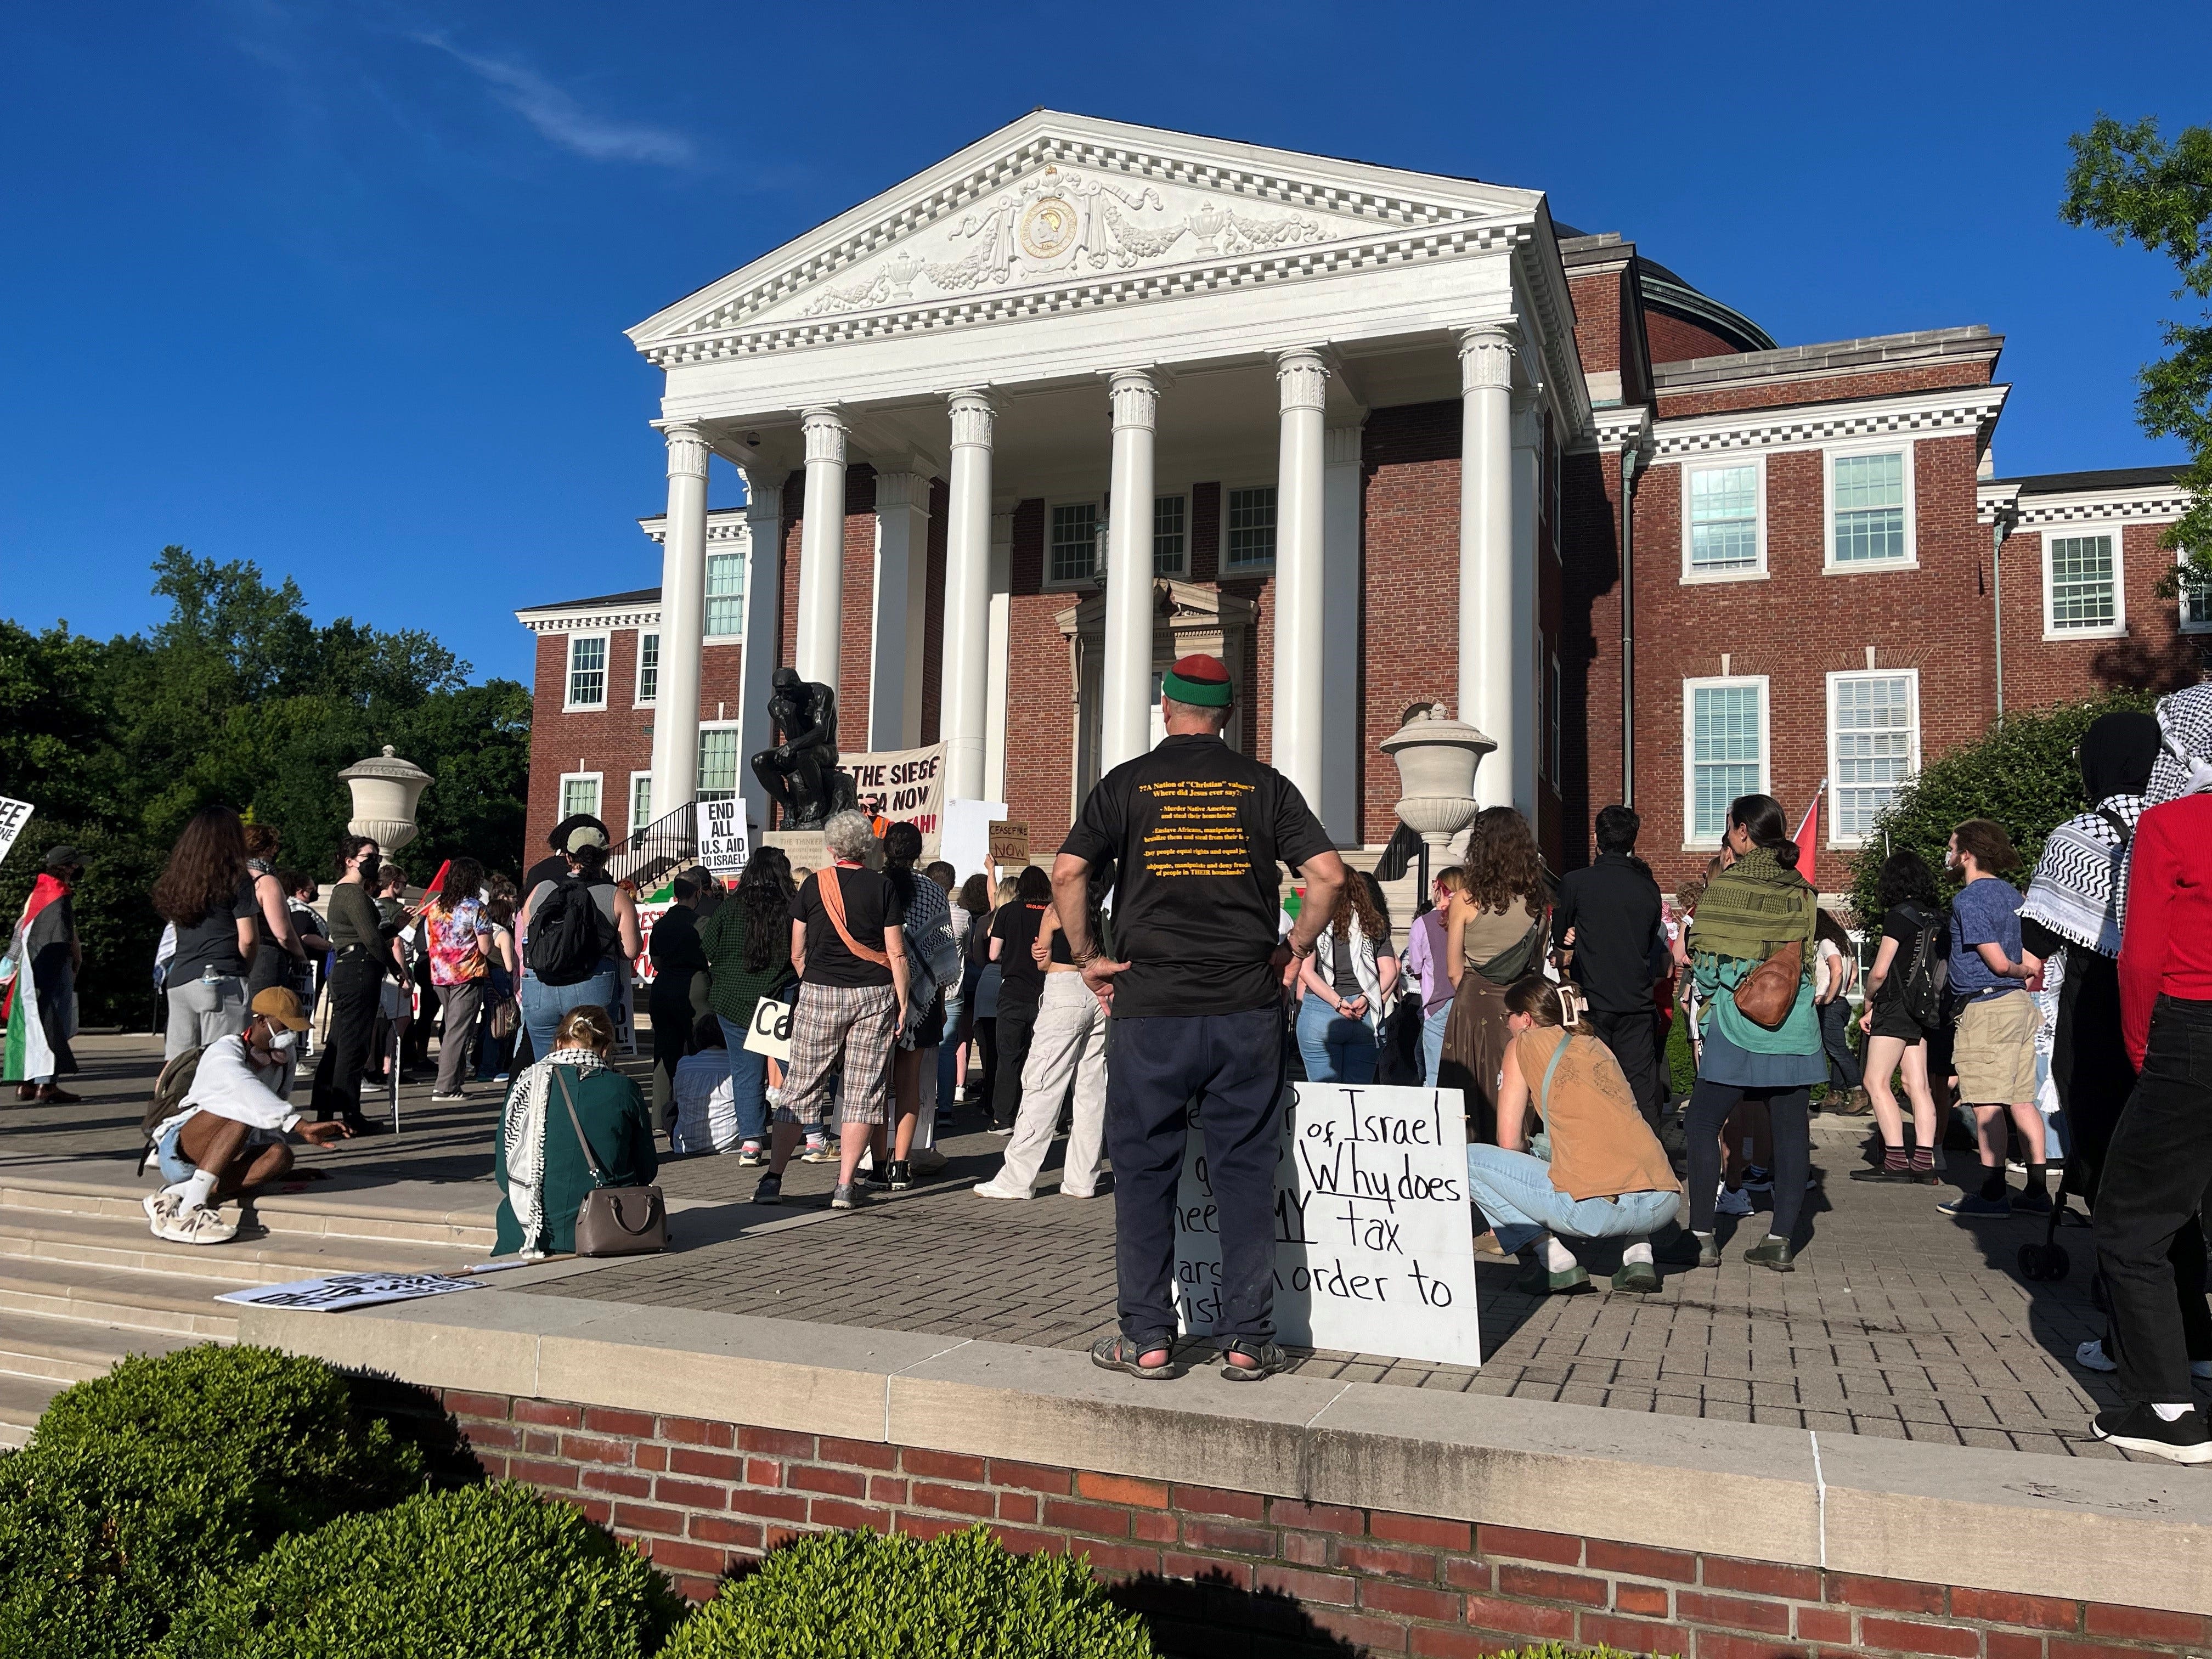 Gerth: U of L students rally for Palestine, but is their message antisemitic?